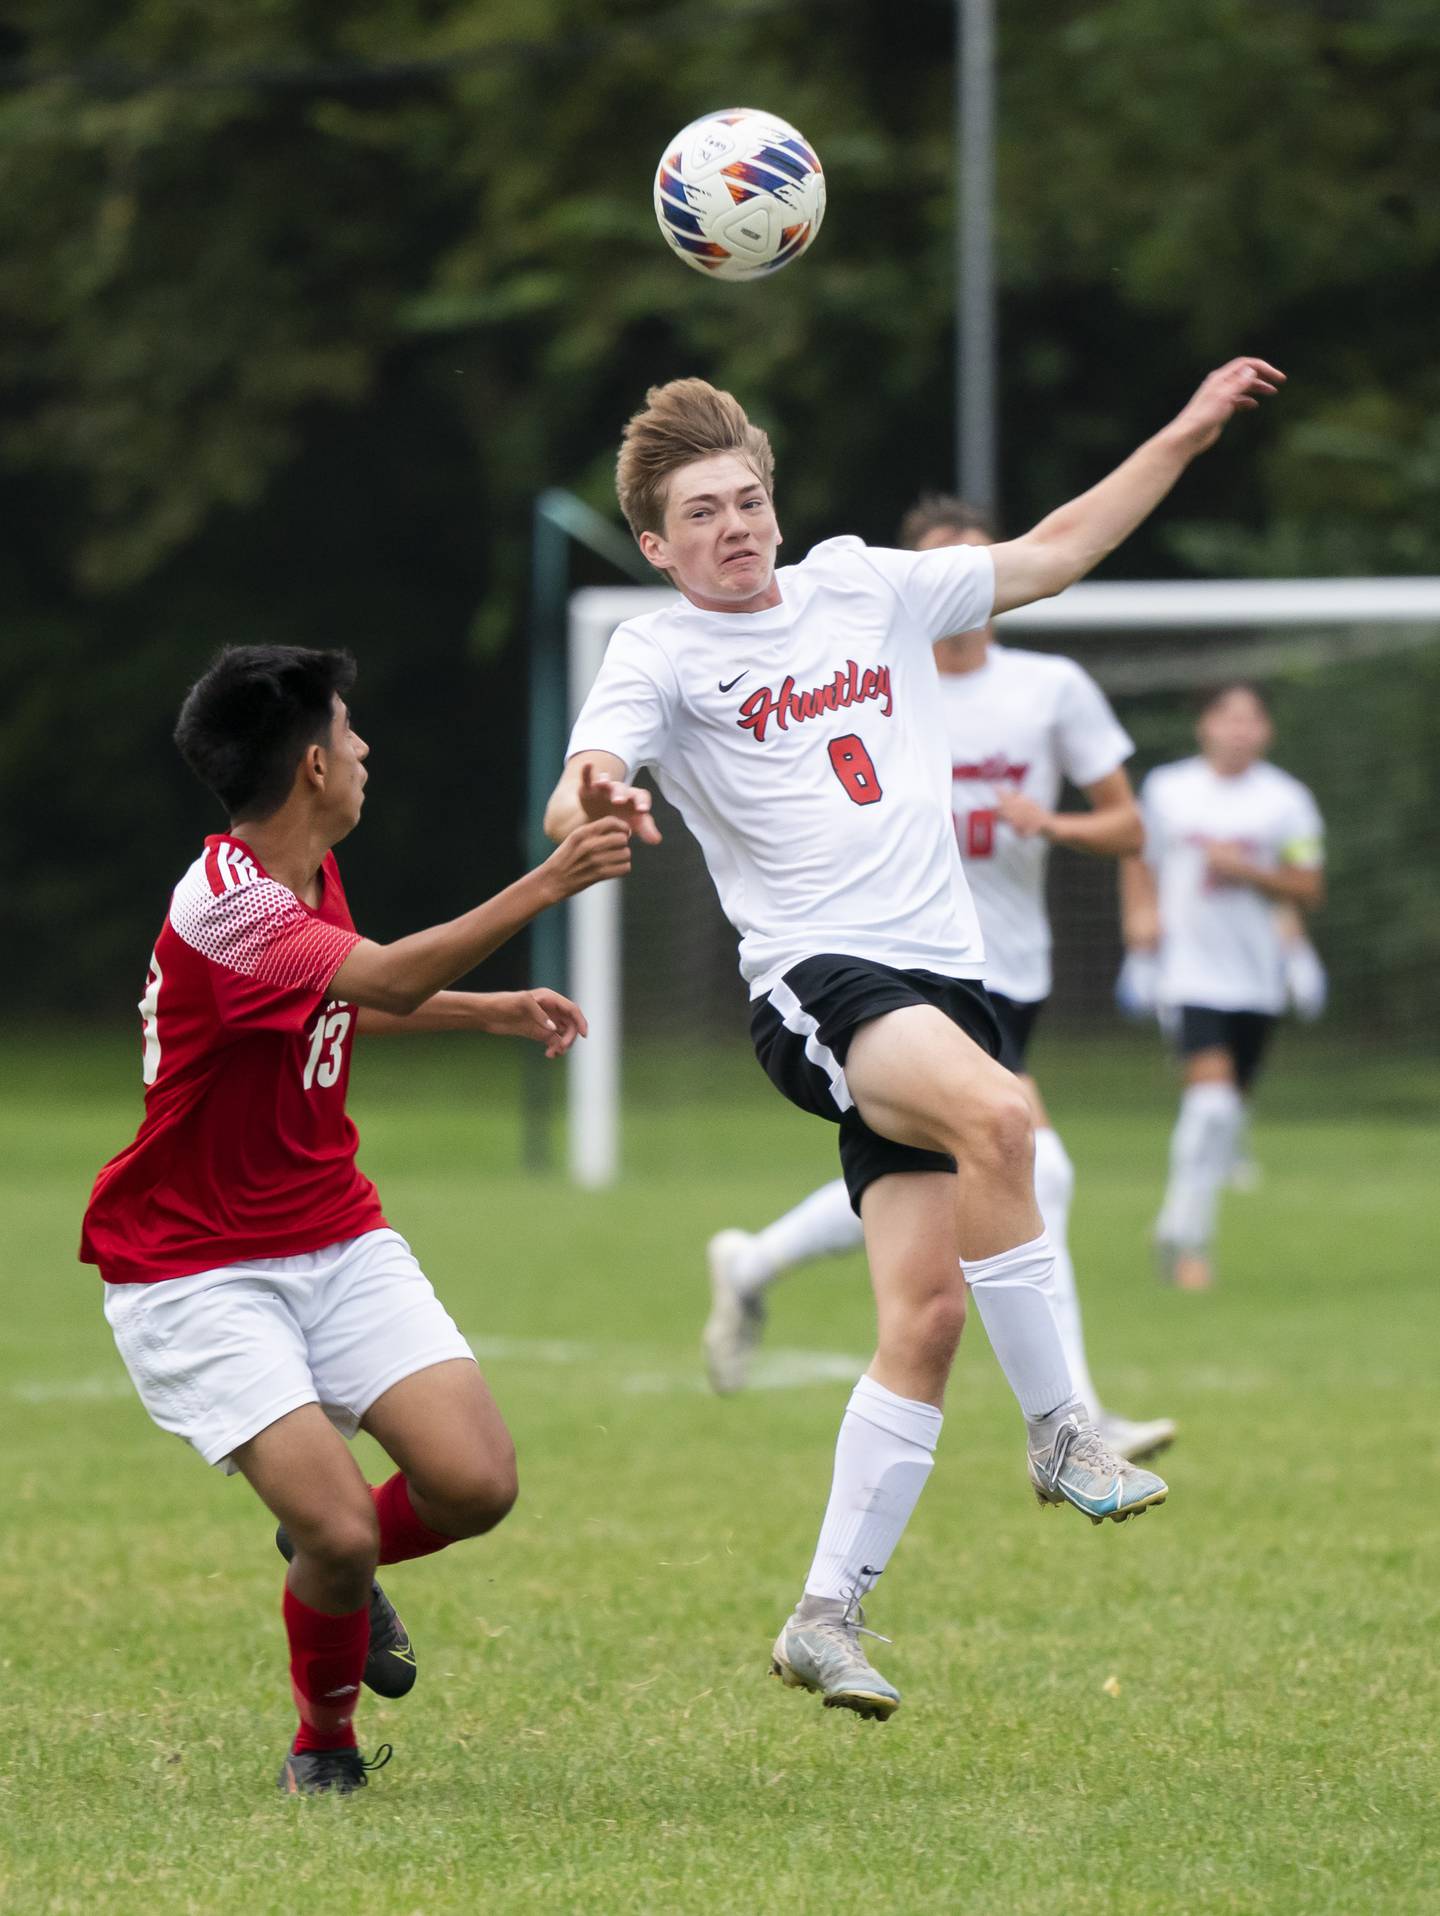 Dundee-Crown's Christian Lechuga and Huntley's Gavin Eagan battle in the air for the ball during their game on Thursday, October 6, 2022 at Dundee-Crown High School in Carpentersville. Dundee-Crown won 1-0.